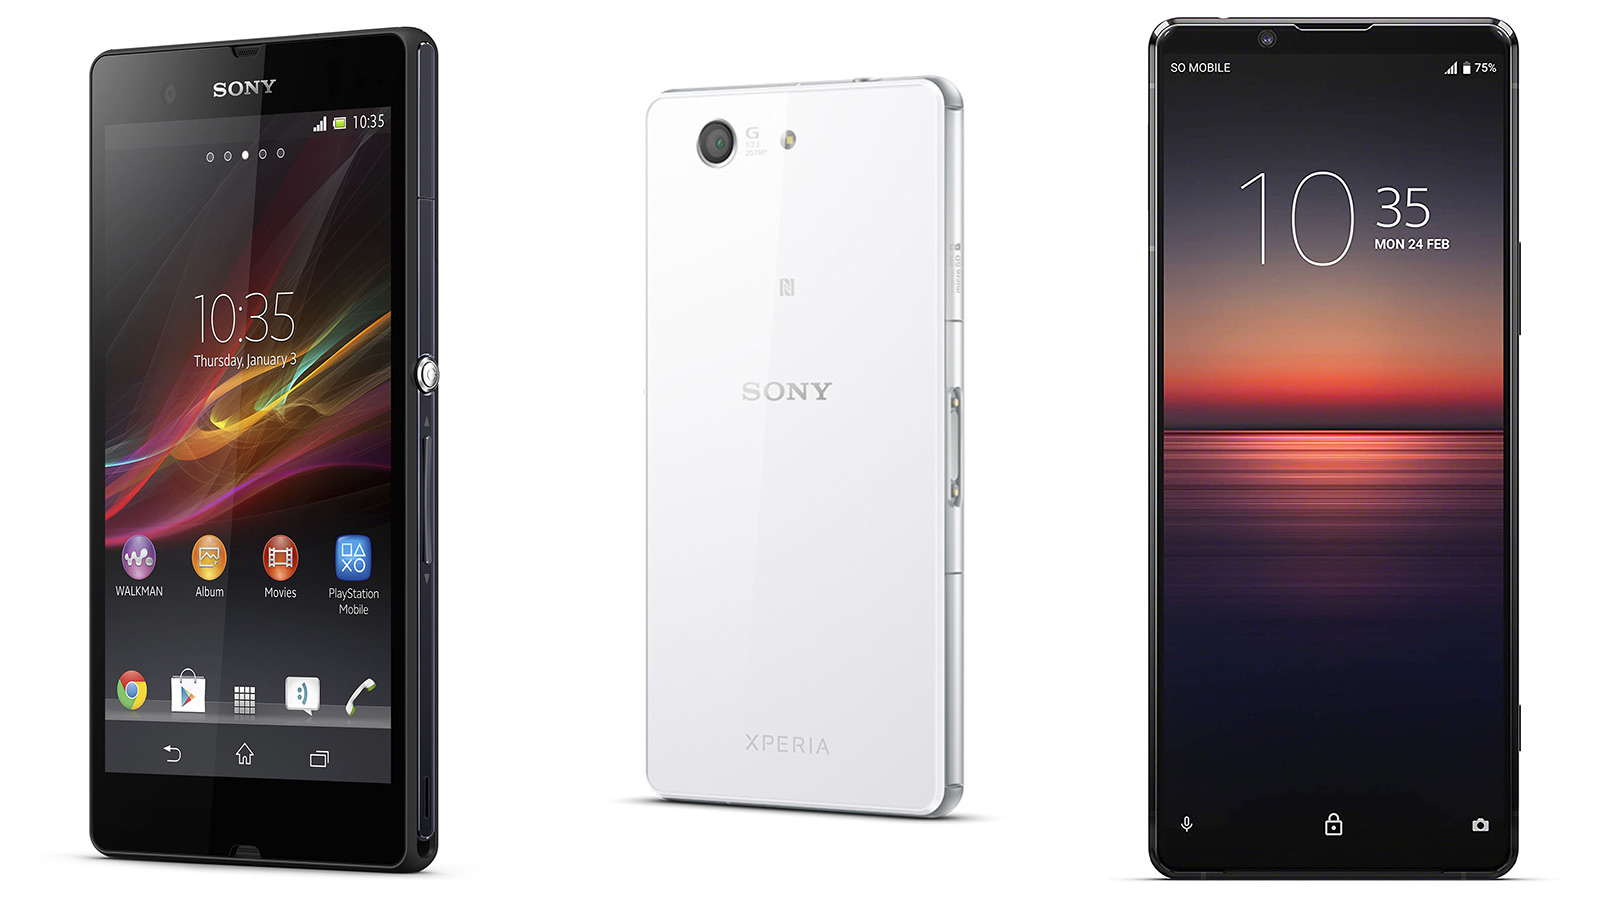 Keeping Up-to-Date: The Latest Updates For Sony Xperia Z2